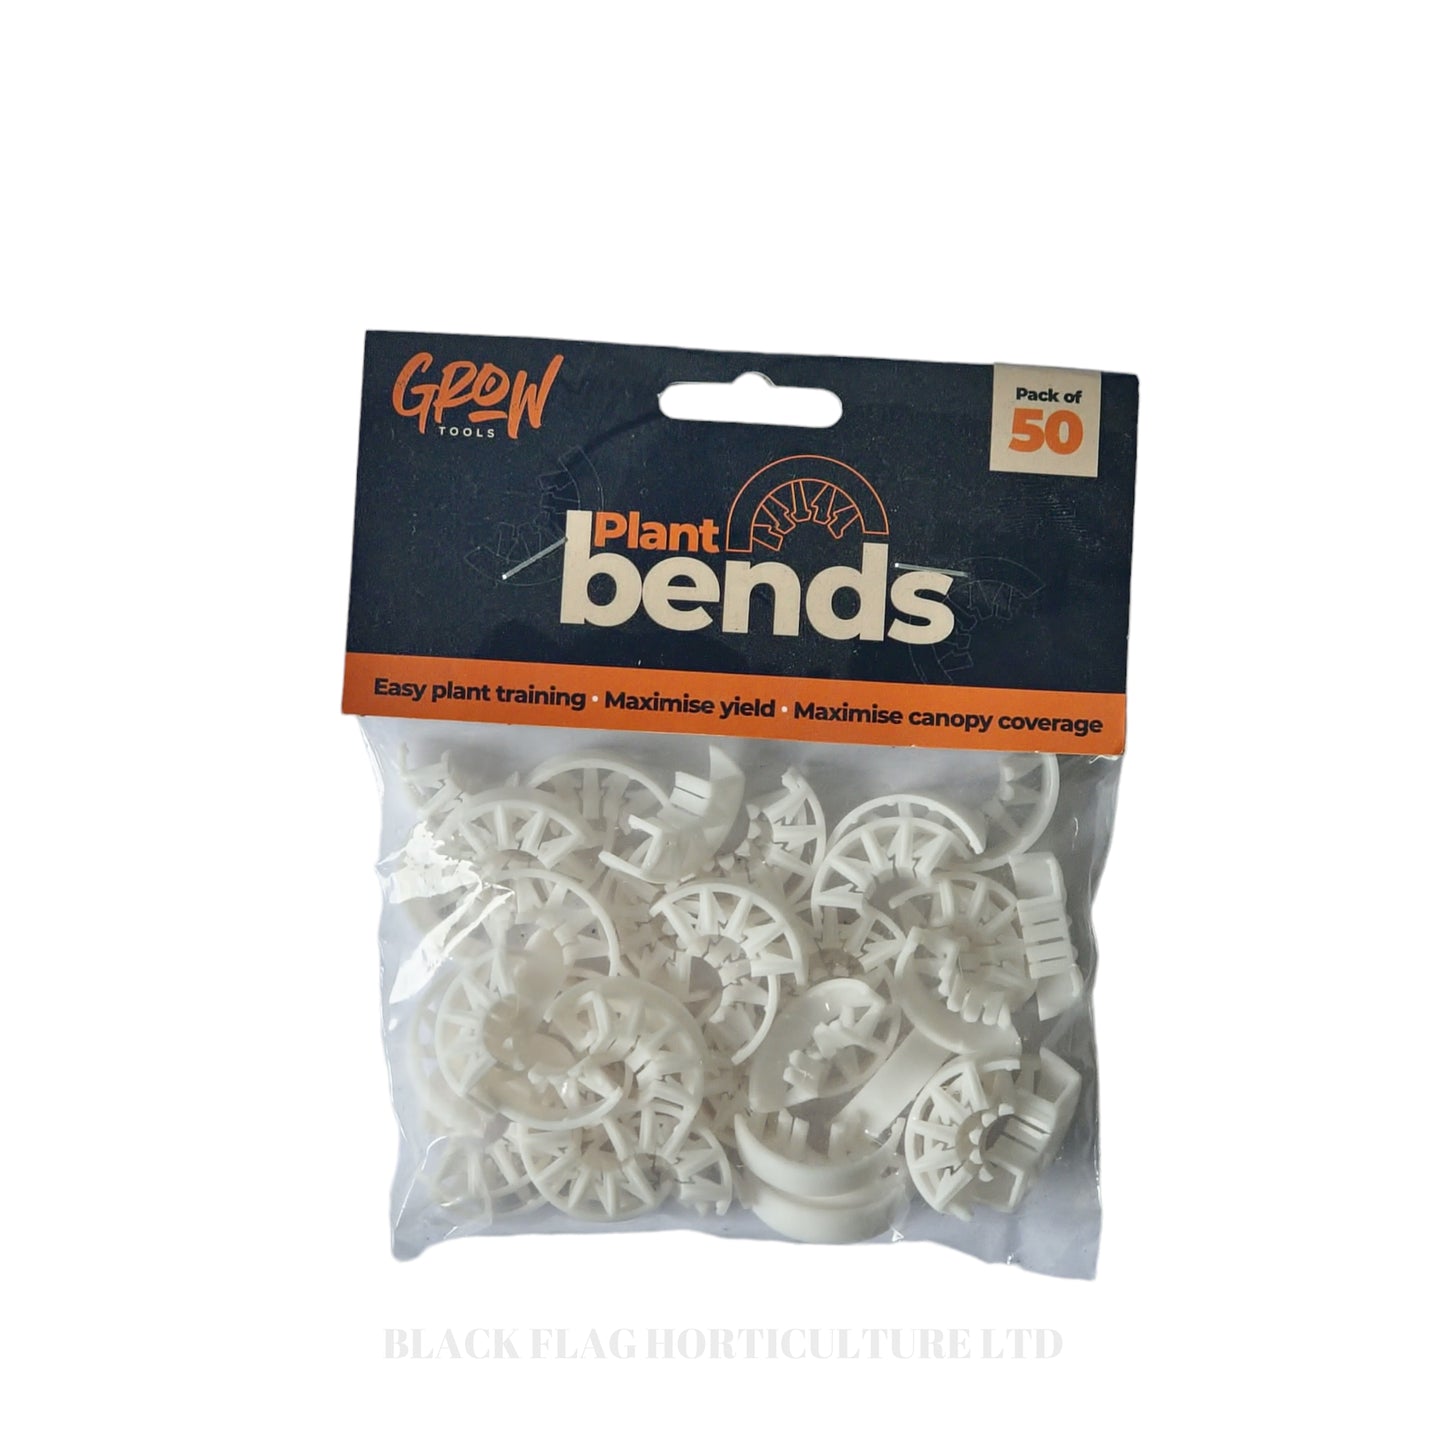 Grow Tools - Plant Bends (50pk) (Low Stress Training)